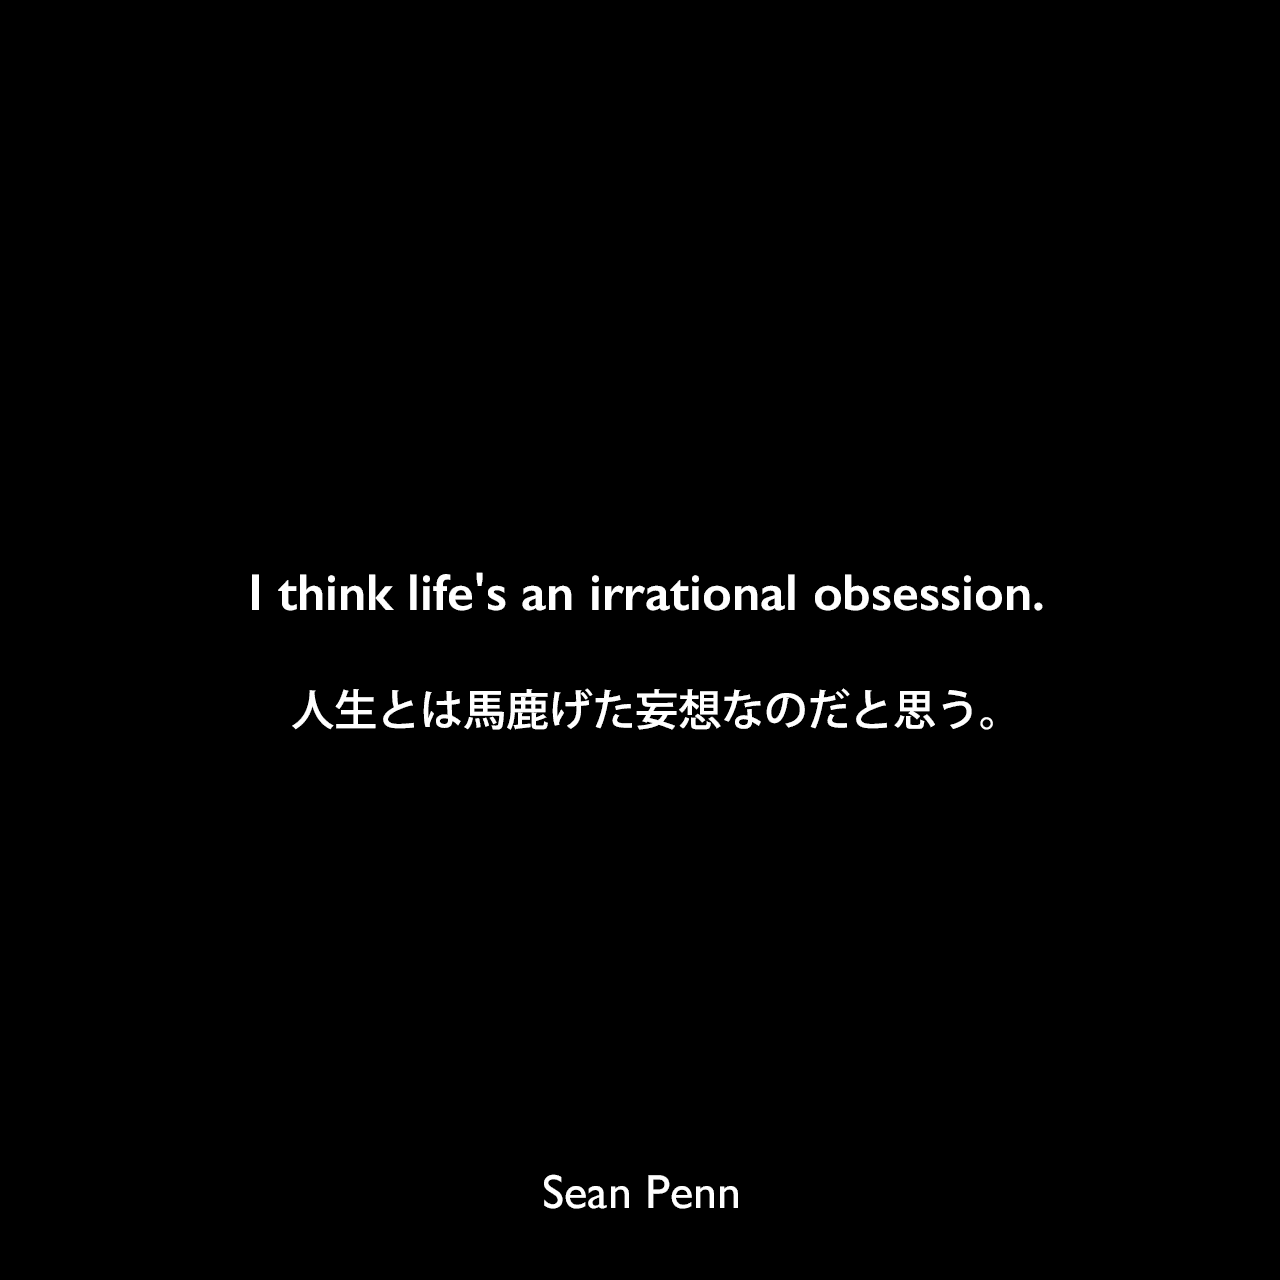 I think life's an irrational obsession.人生とは馬鹿げた妄想なのだと思う。Sean Penn